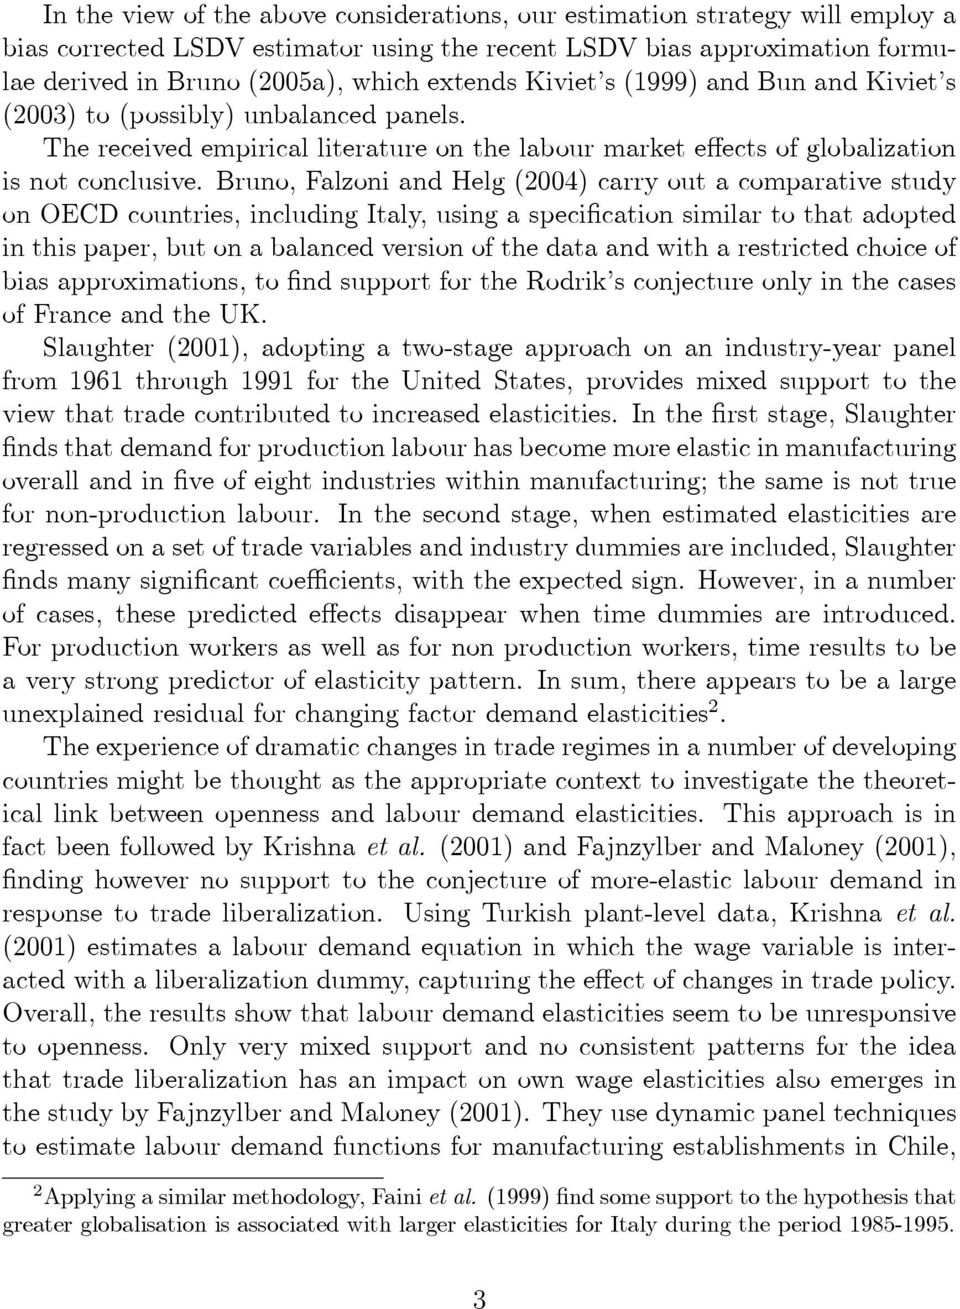 Bruno, Falzoni and Helg (2004) carry out a comparative study on OECD countries, including Italy, using a specification similar to that adopted in this paper, but on a balanced version of the data and